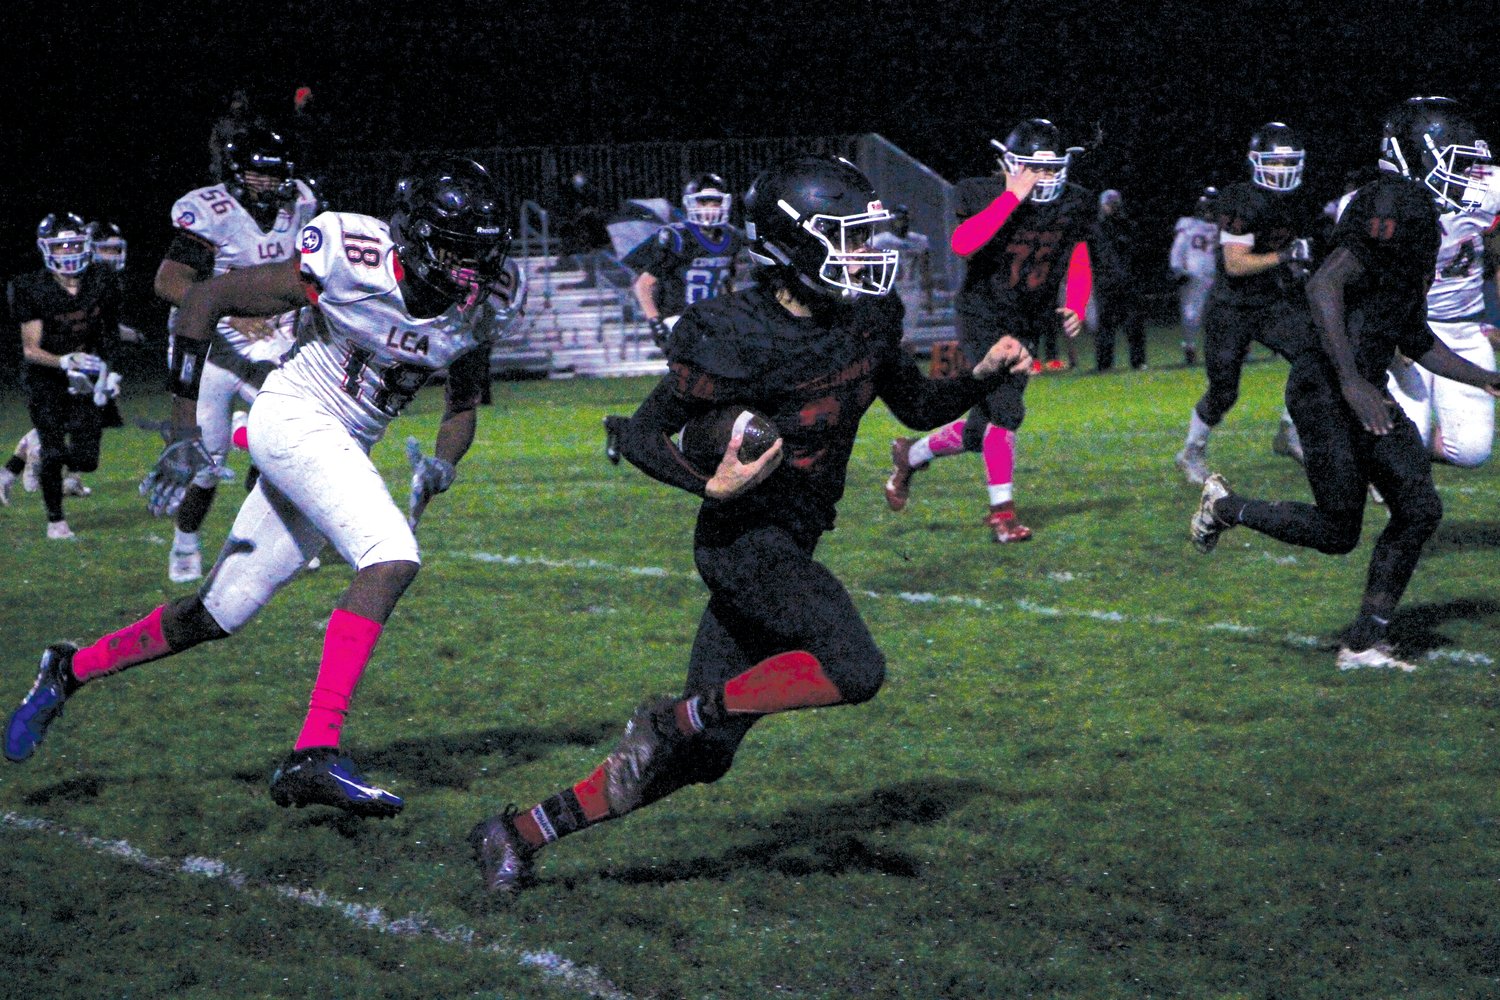 Senior running back Logan Massie charges past Eagles defenders. Massie scored three touchdowns in the first half and had 169 rushing yards at the final whistle.